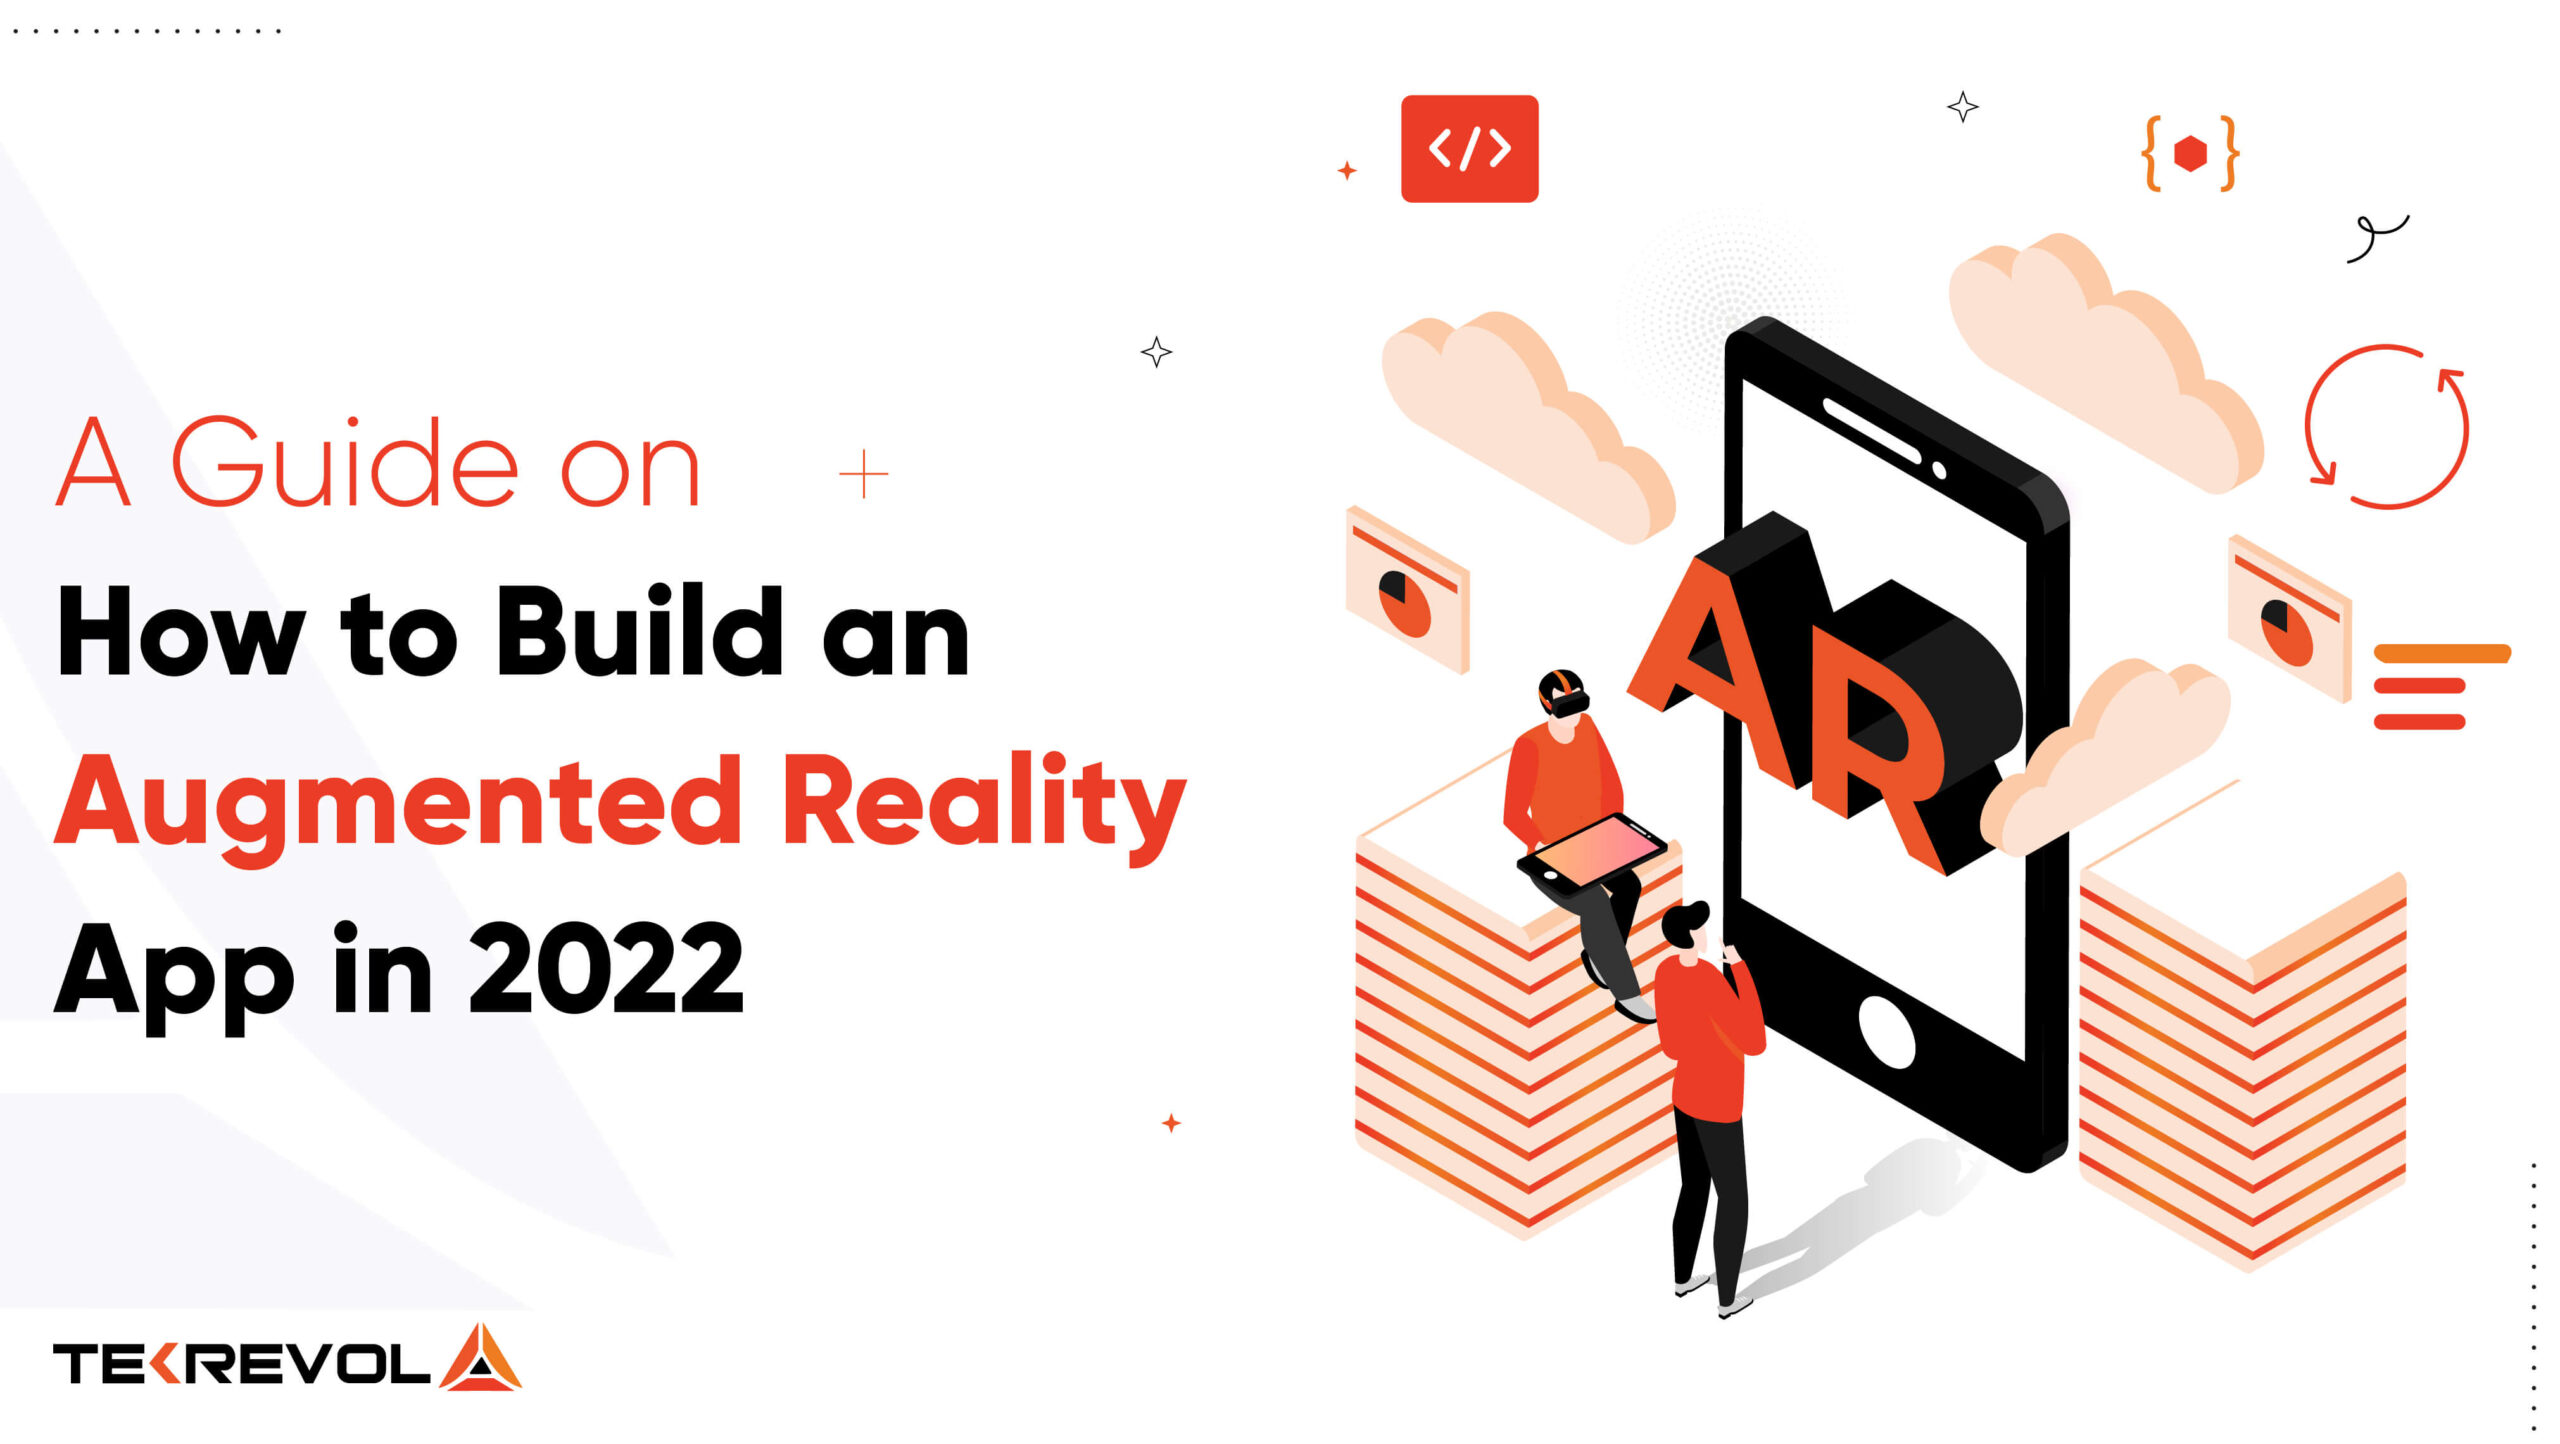 A Guide on How to Build an Augmented Reality App in 2022